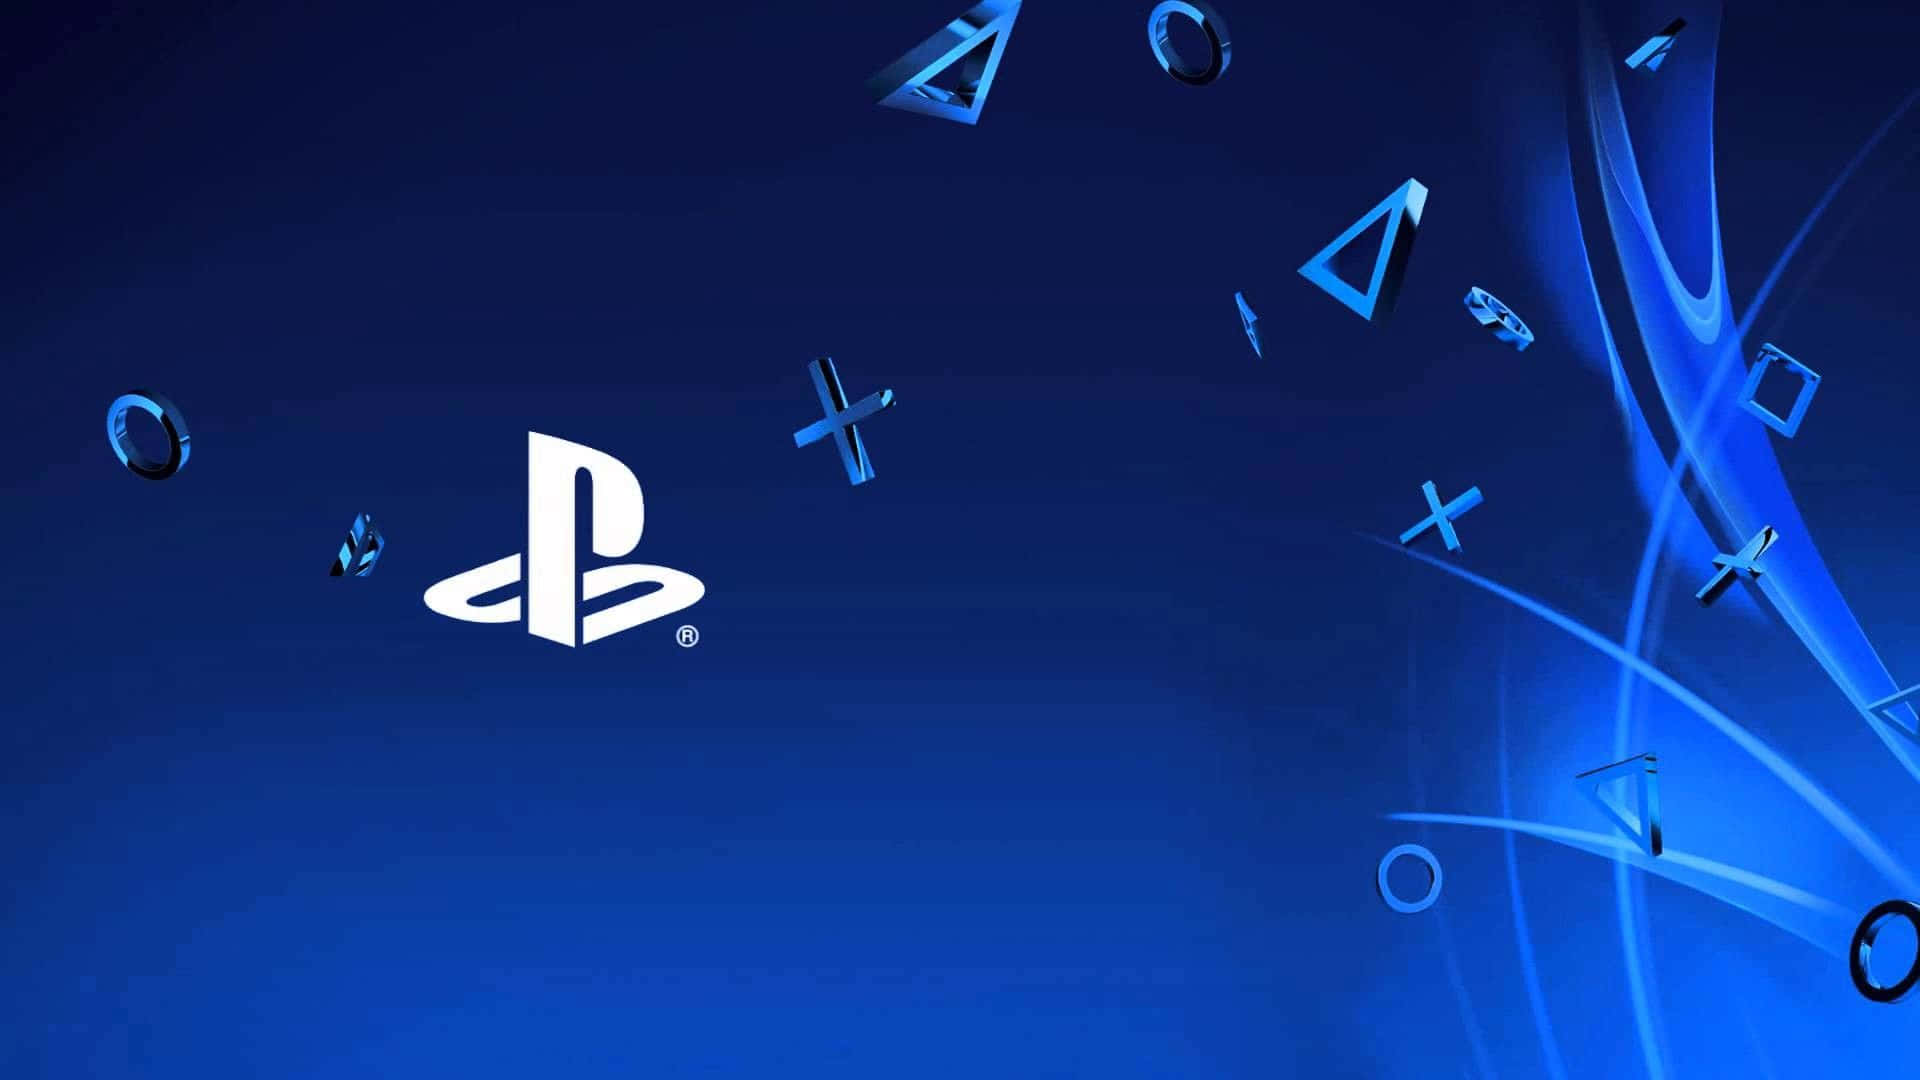 Default Cool Ps4 With Floating Controller Icons Wallpaper